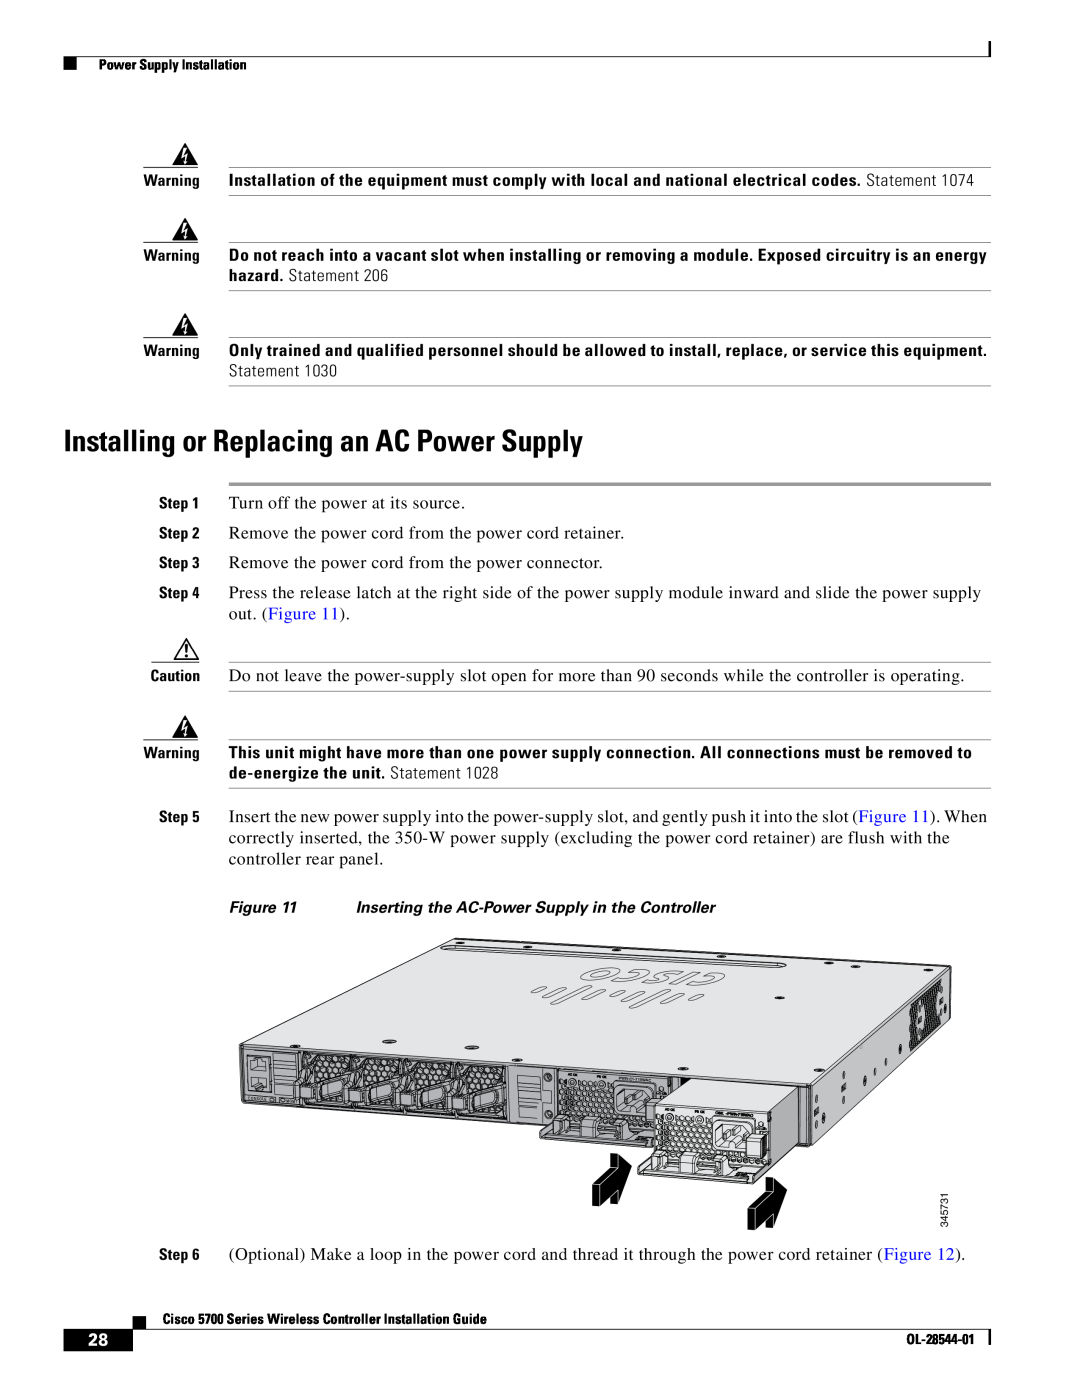 Cisco Systems AIRCT5760HAK9, AIRCT576025K9 specifications Installing or Replacing an AC Power Supply 